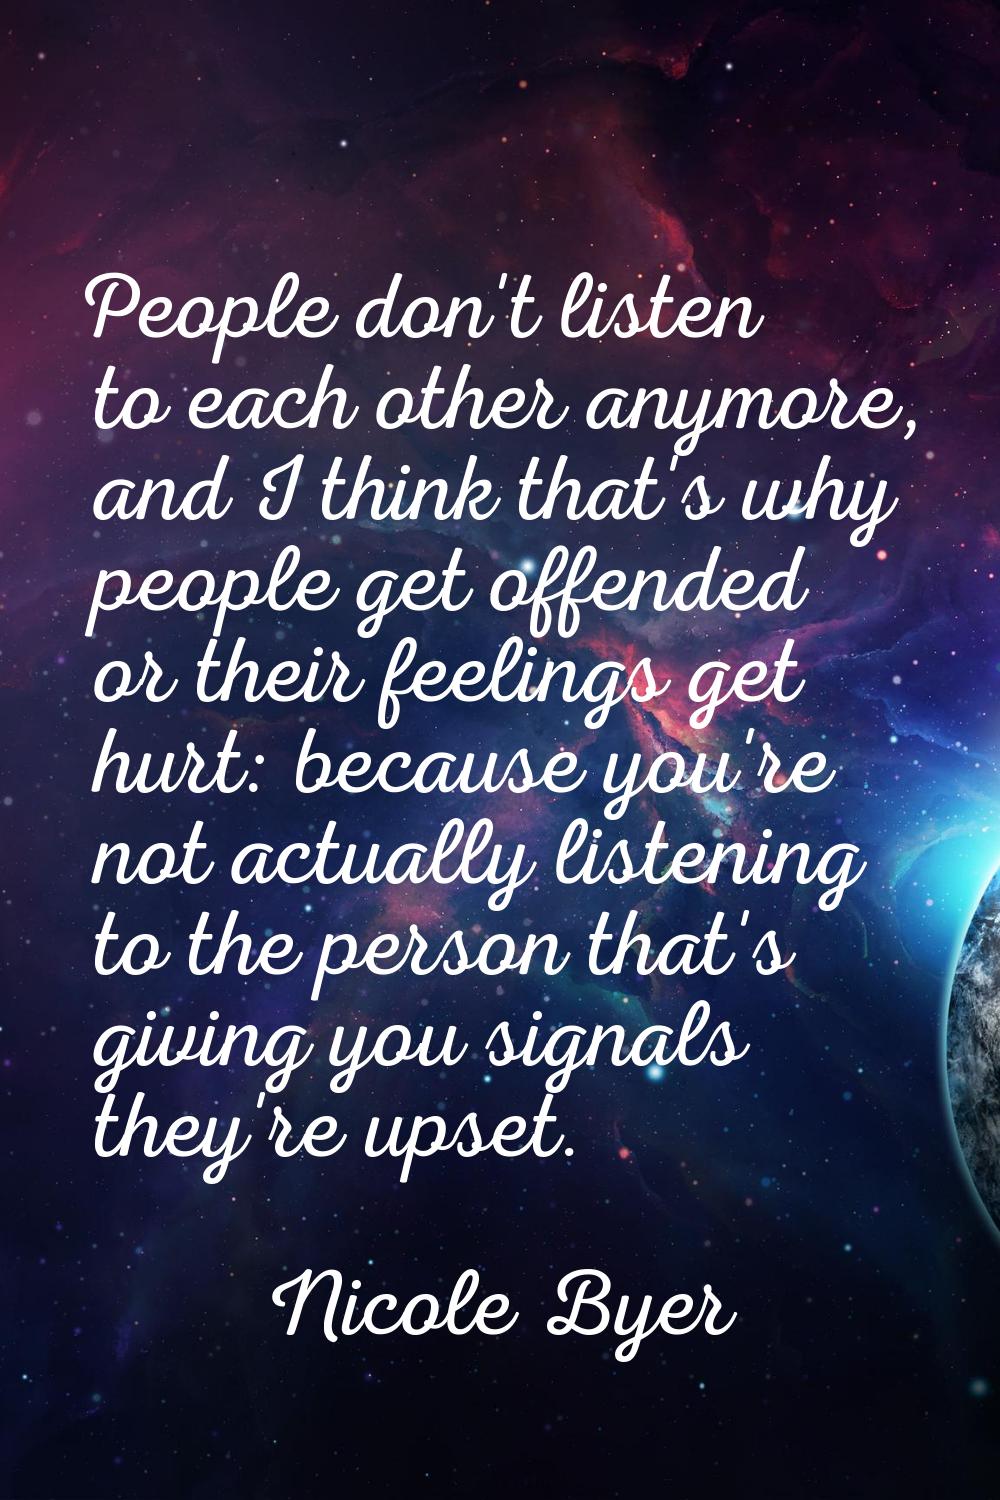 People don't listen to each other anymore, and I think that's why people get offended or their feel